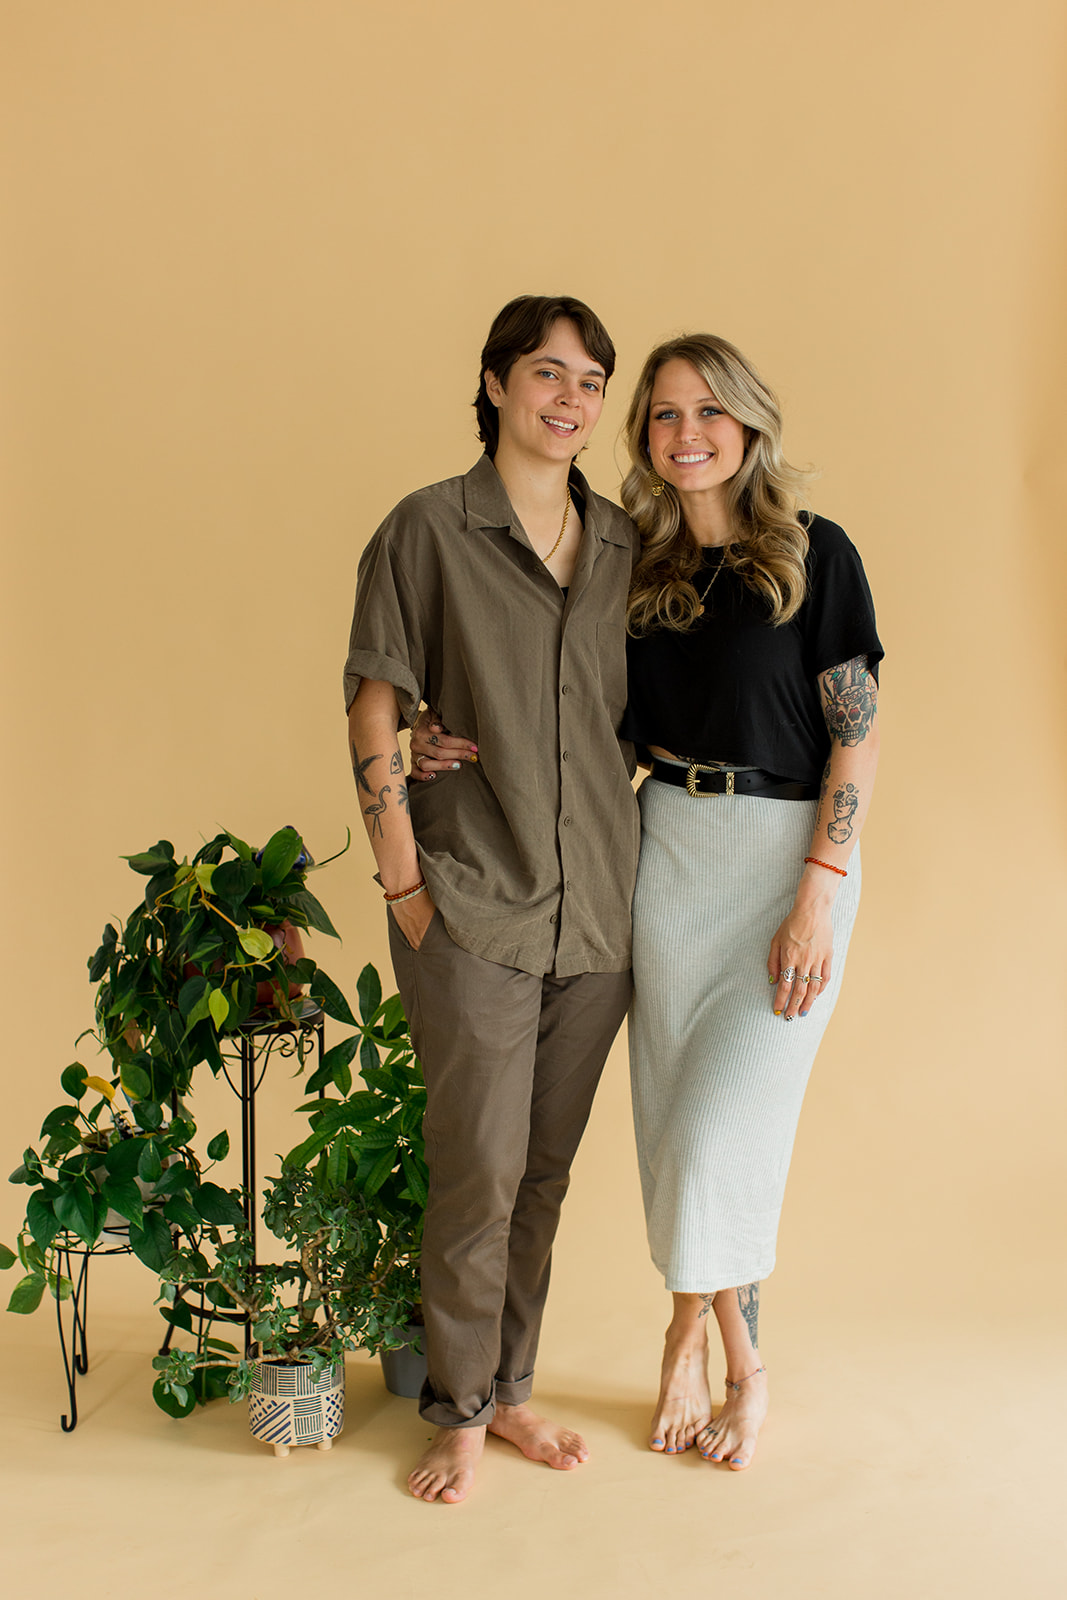 A couple laugh and smile at the camera while standing in front of a backdrop with their beloved houseplants.